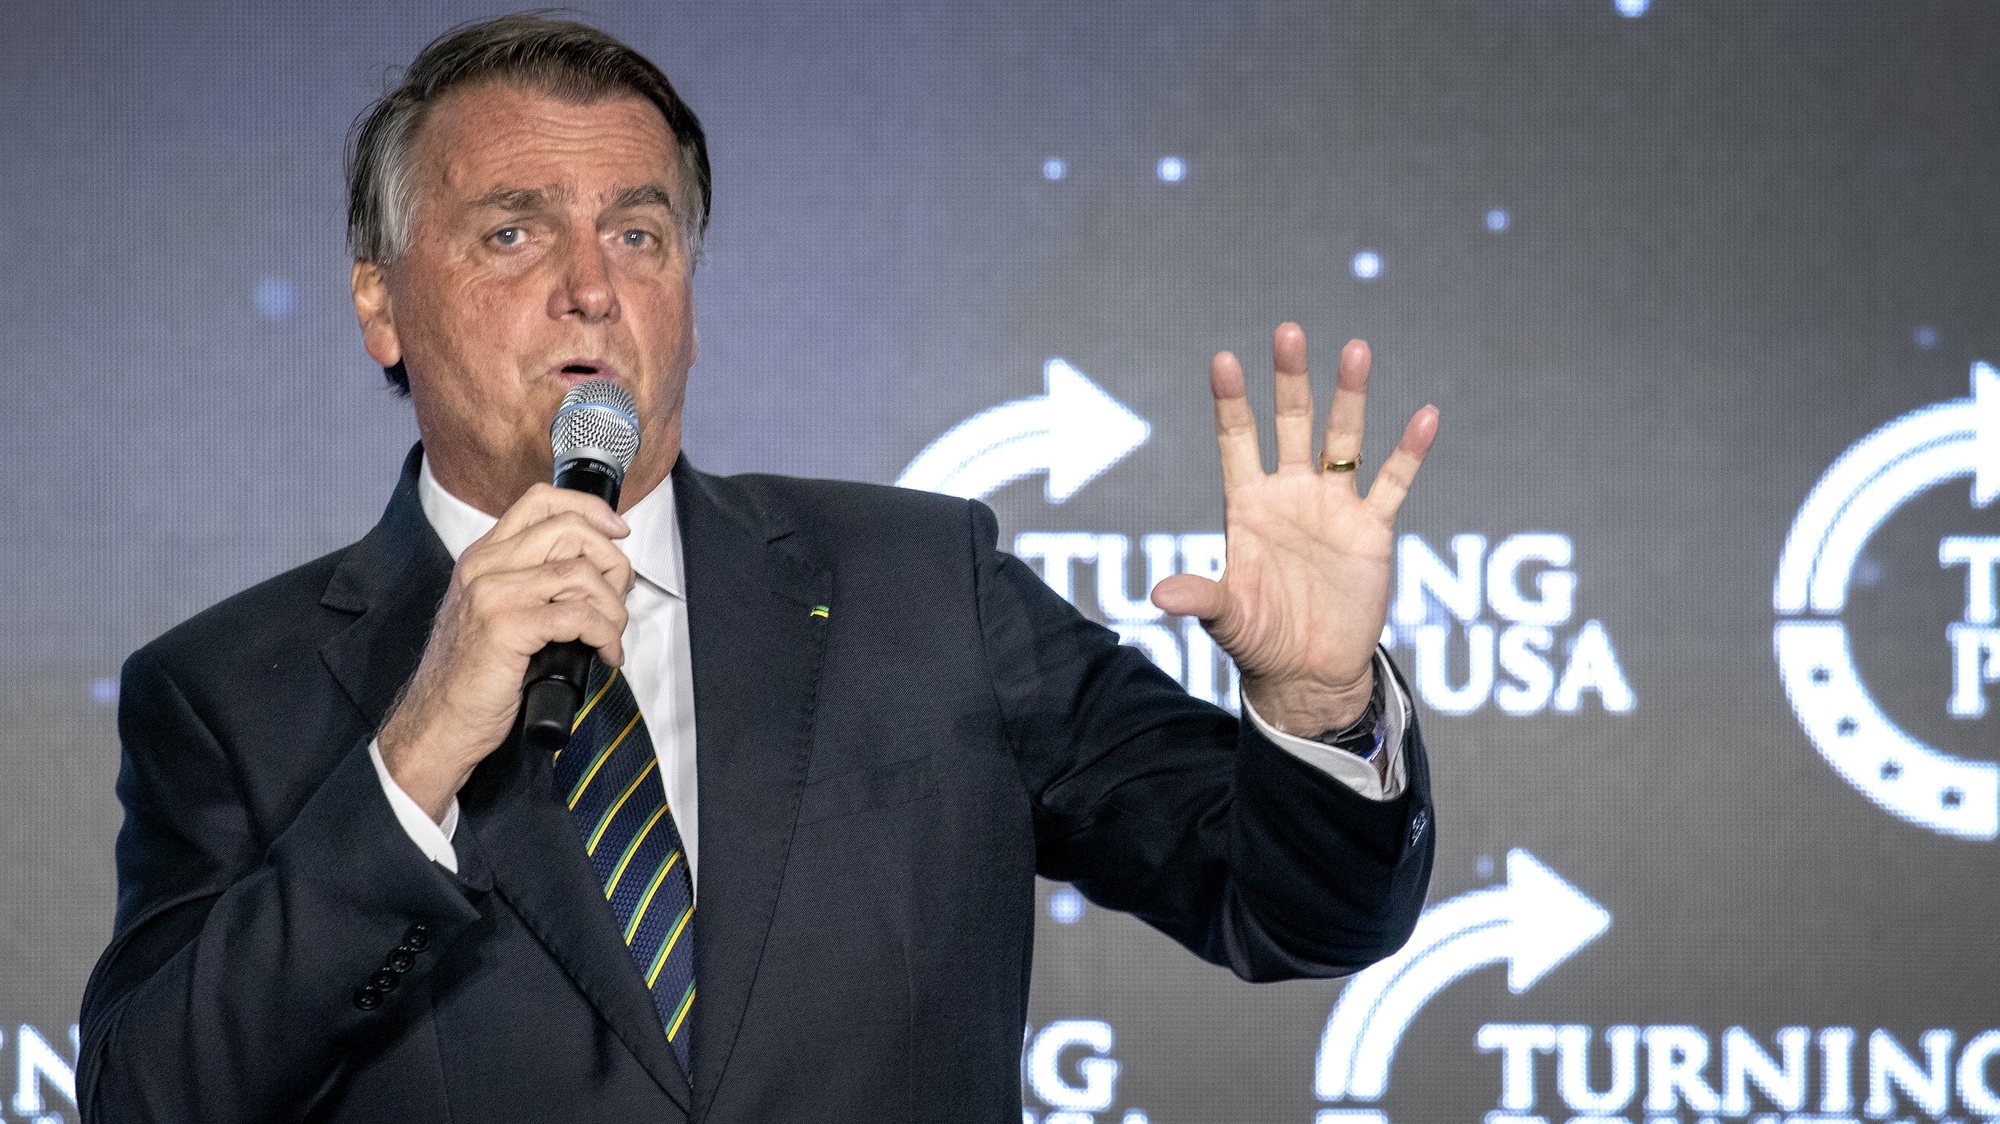 epa10446295 Former Brazil President Jair Bolsonaro attends the &#039;Power of the People&#039; event at the Trump National Doral Miami, in Miami, Florida, USA, 03 February 2023. The event was hosted by Turning Point USA, a non-profit organization founded in 2012. According to the event organizers, it was Bolsonaro&#039;s first public event following the recent Brazilian elections.  EPA/CRISTOBAL HERRERA-ULASHKEVICH